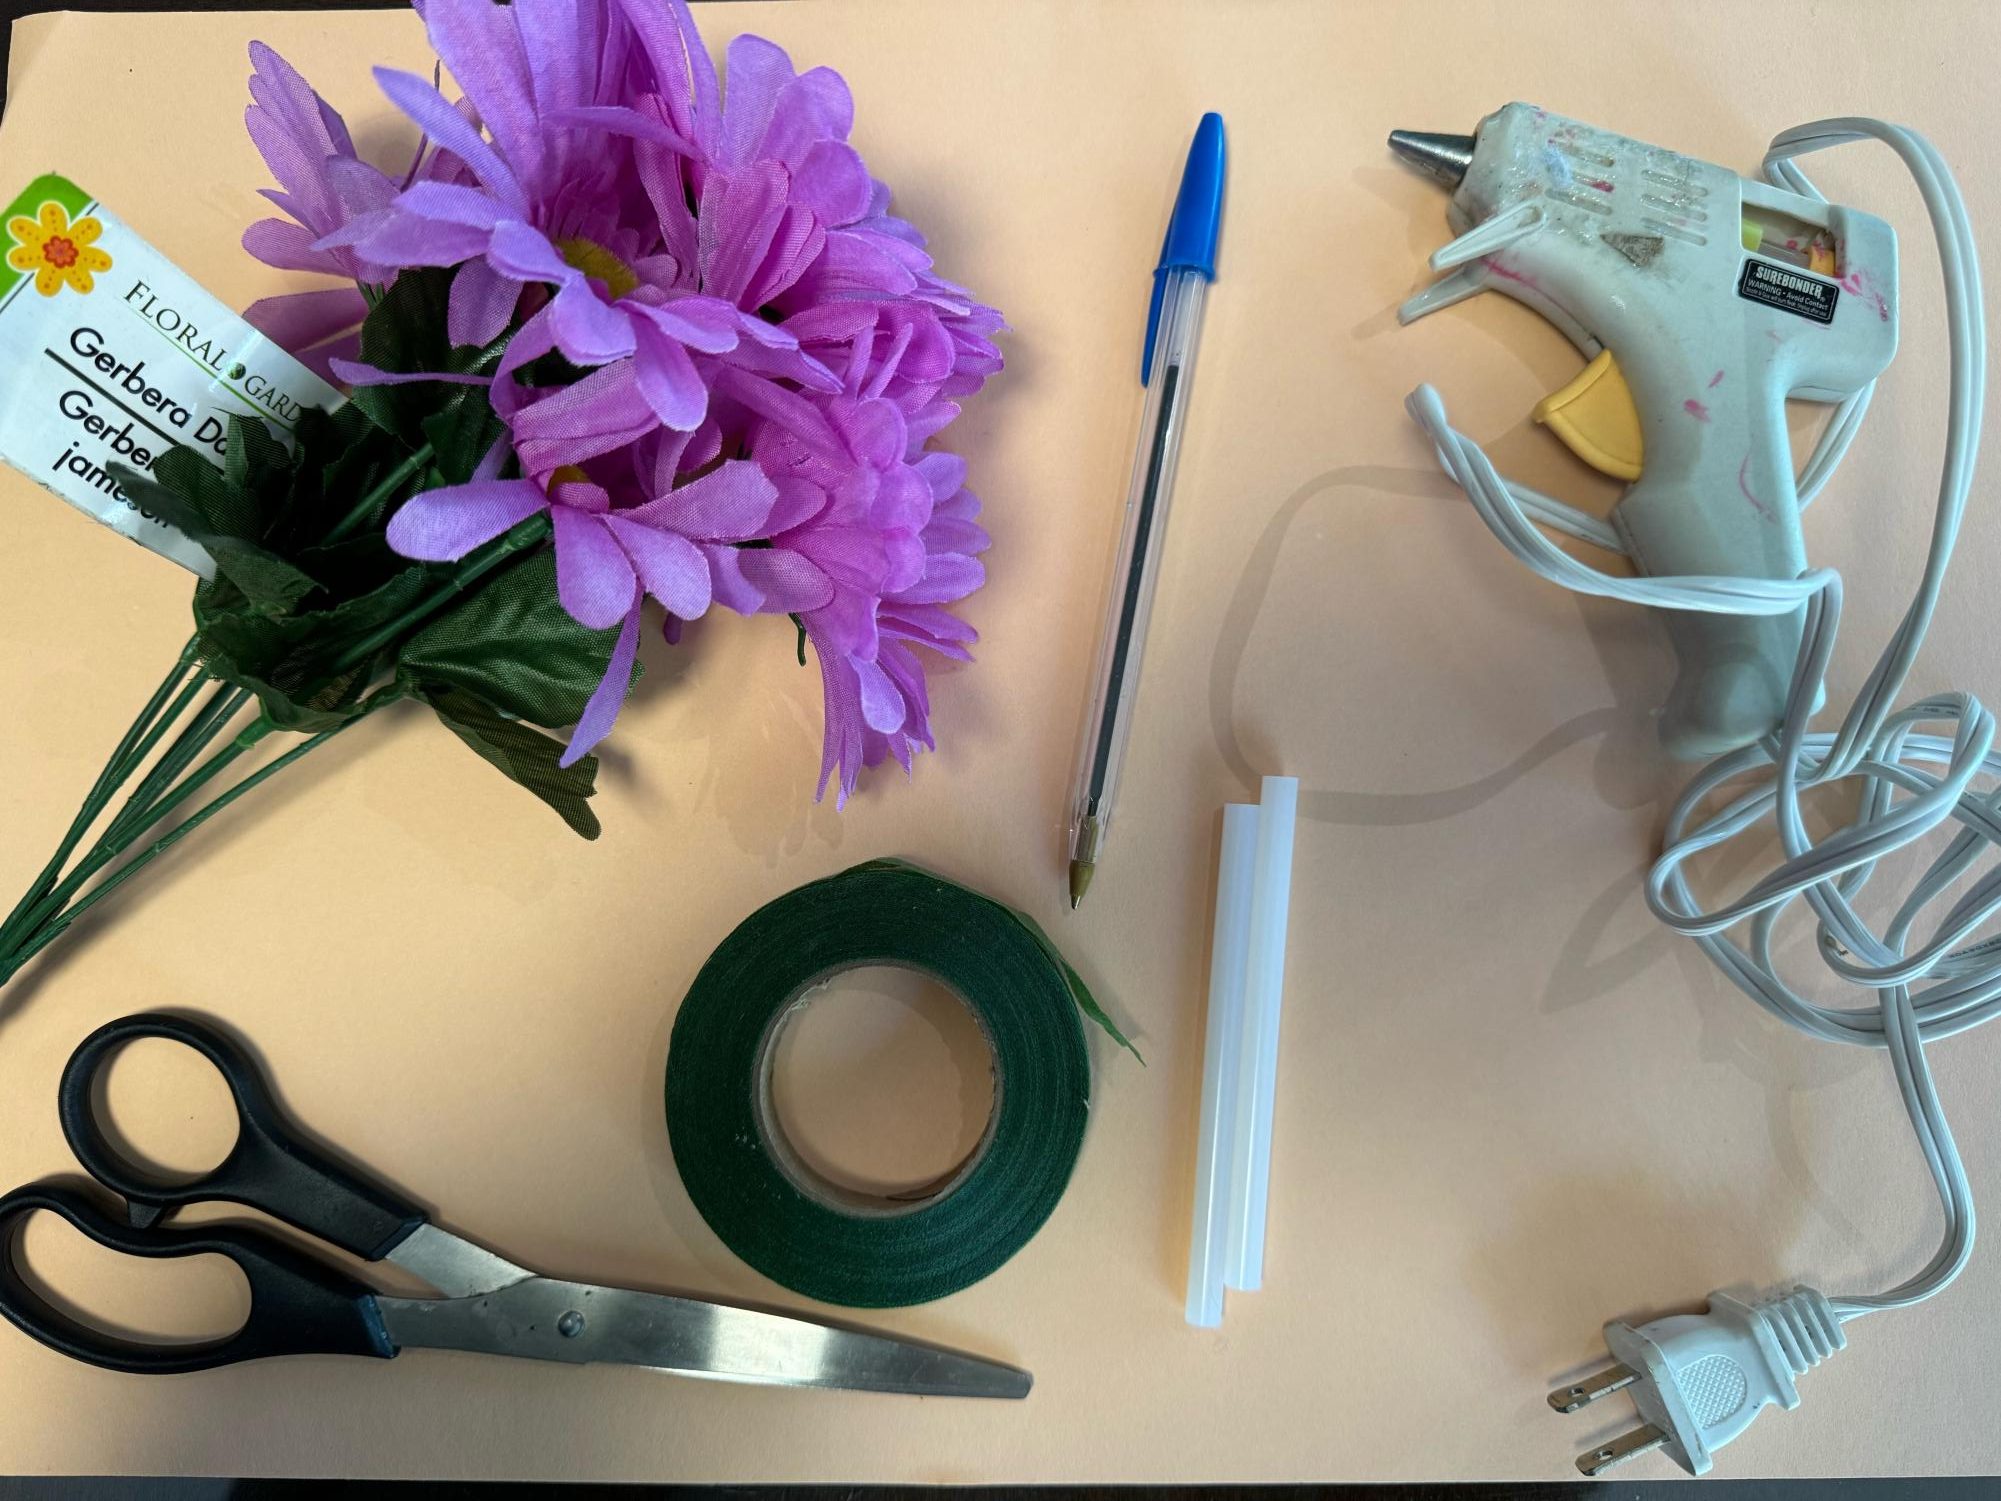 The materials you need to make the DIY flower pens.